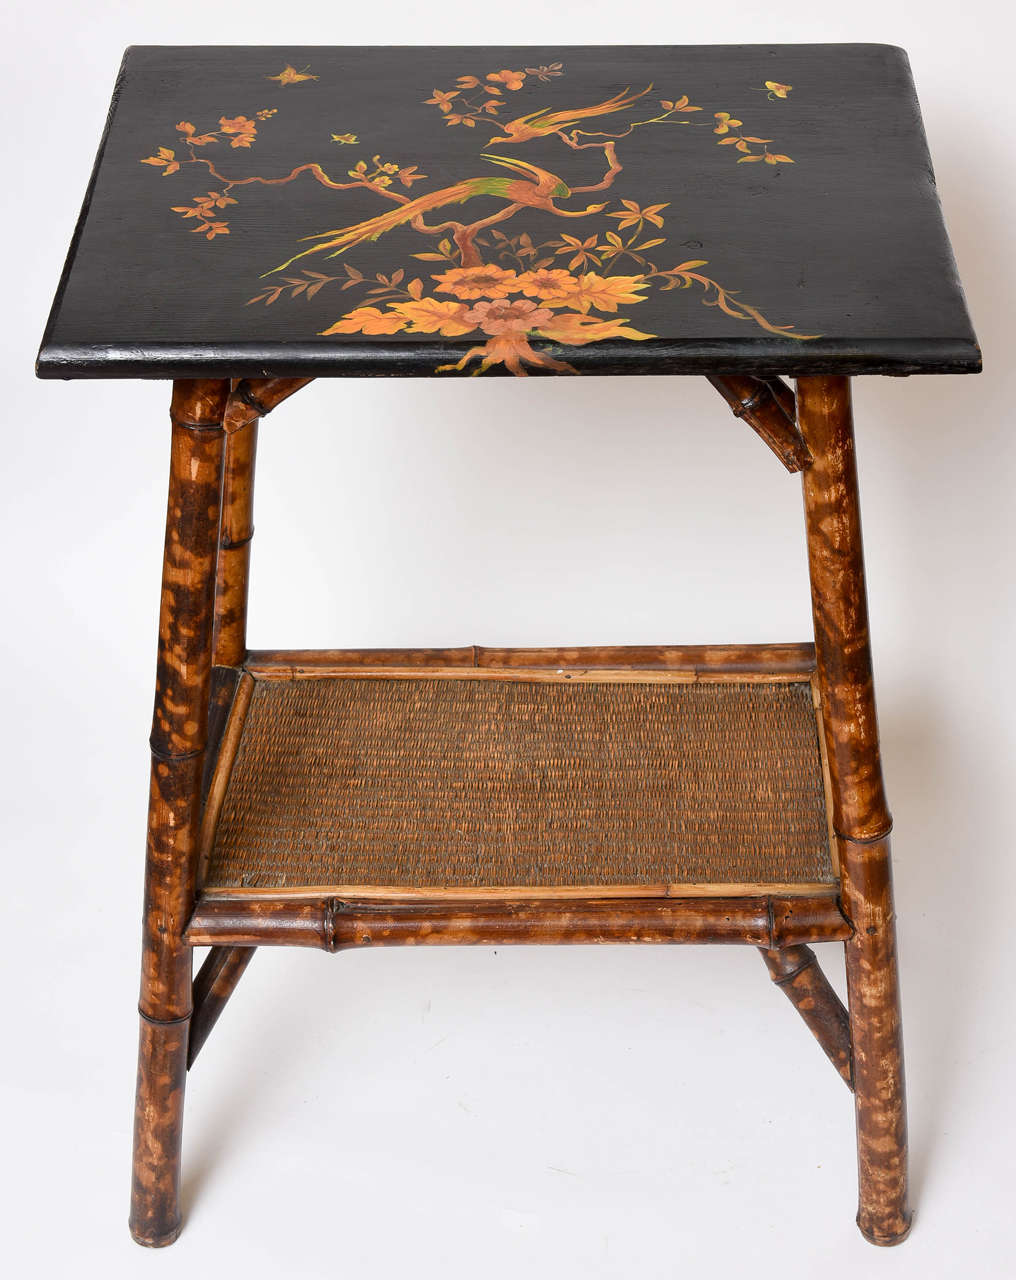 Bamboo table is graced with a wonderful hand painted top displaying birds (replacing original grasscloth).